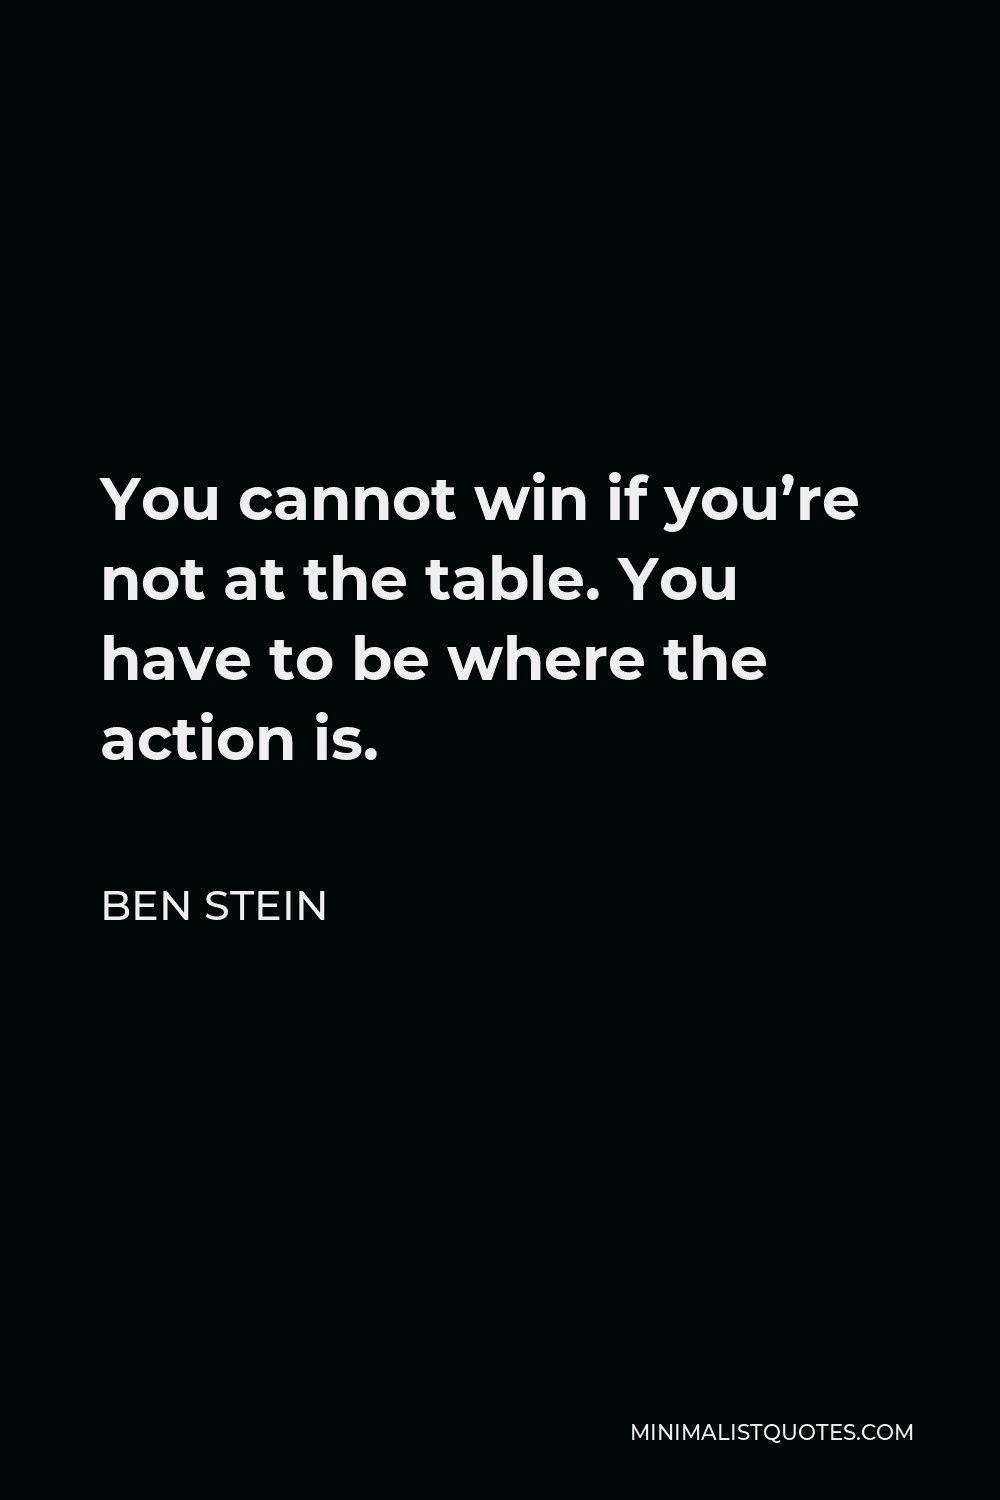 Ben Stein Quote - You cannot win if you’re not at the table. You have to be where the action is.